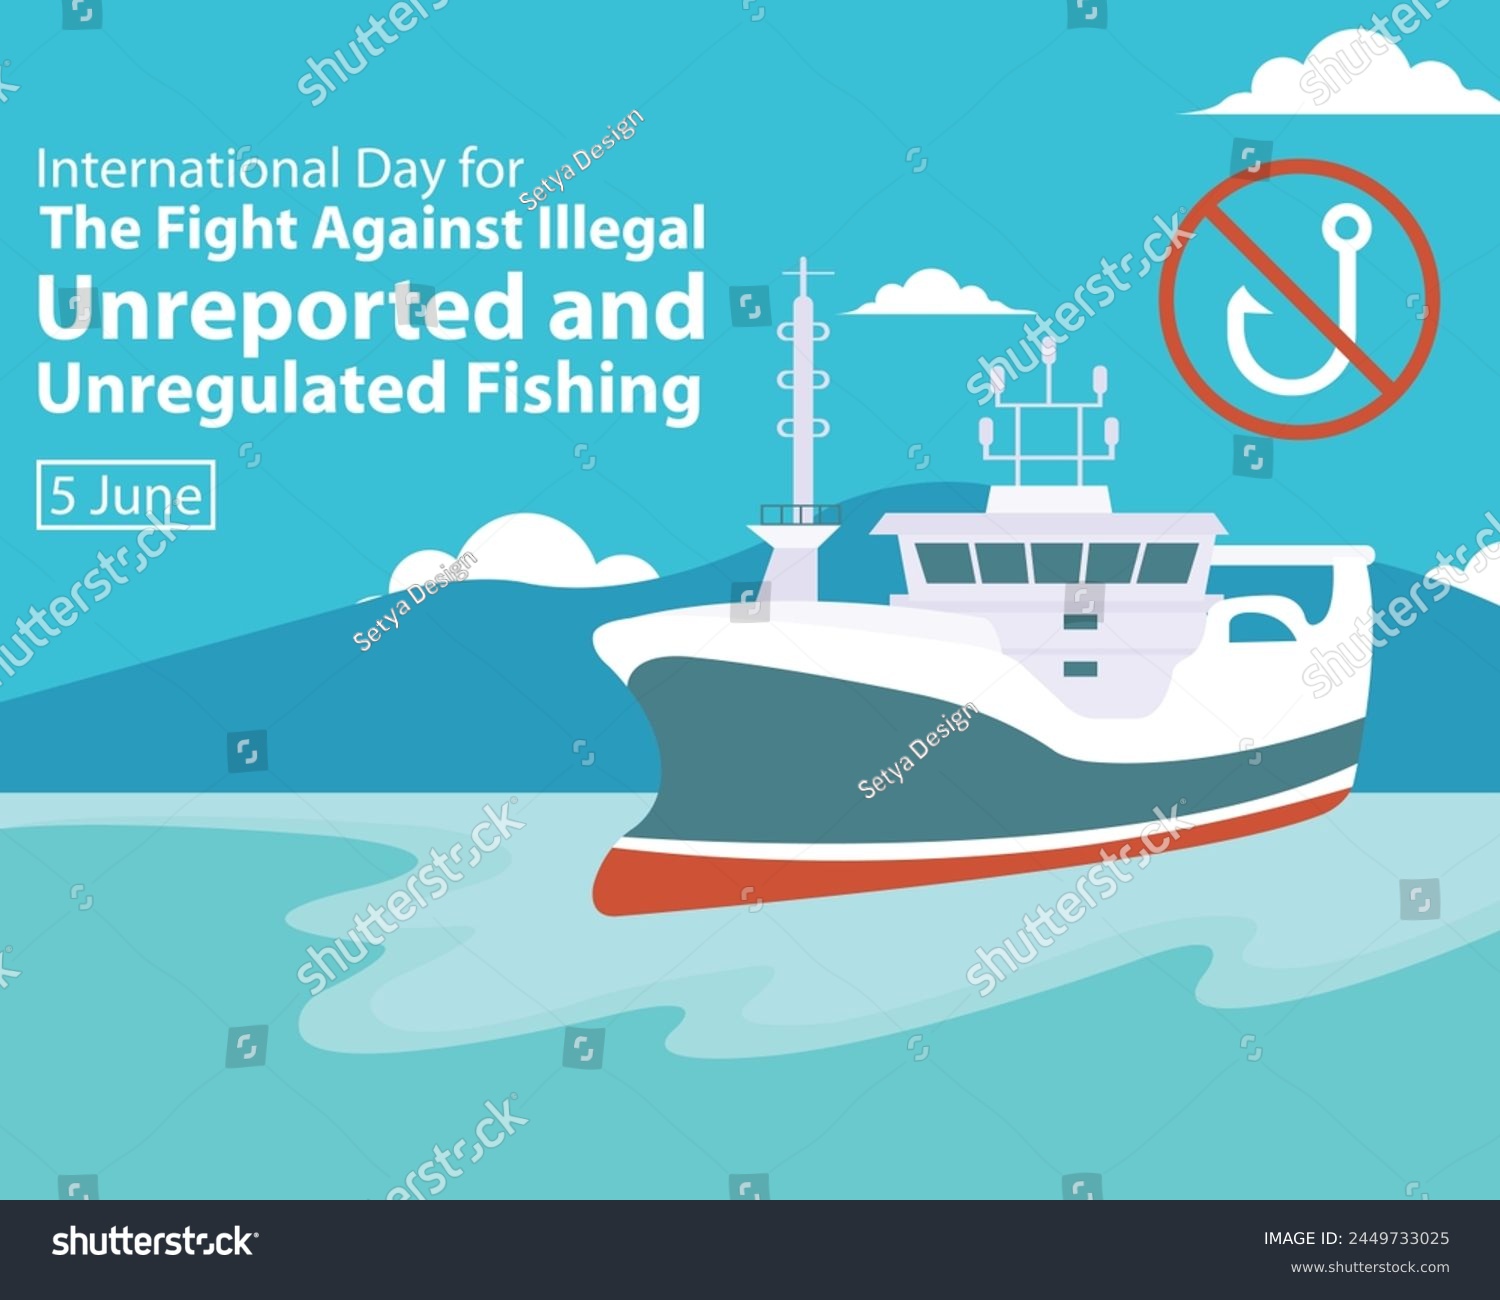 illustration vector graphic of fishing boats along the coast, perfect for international day, fight against illegal, unreported and unregulated, fishing, celebrate, greeting card, etc. #2449733025